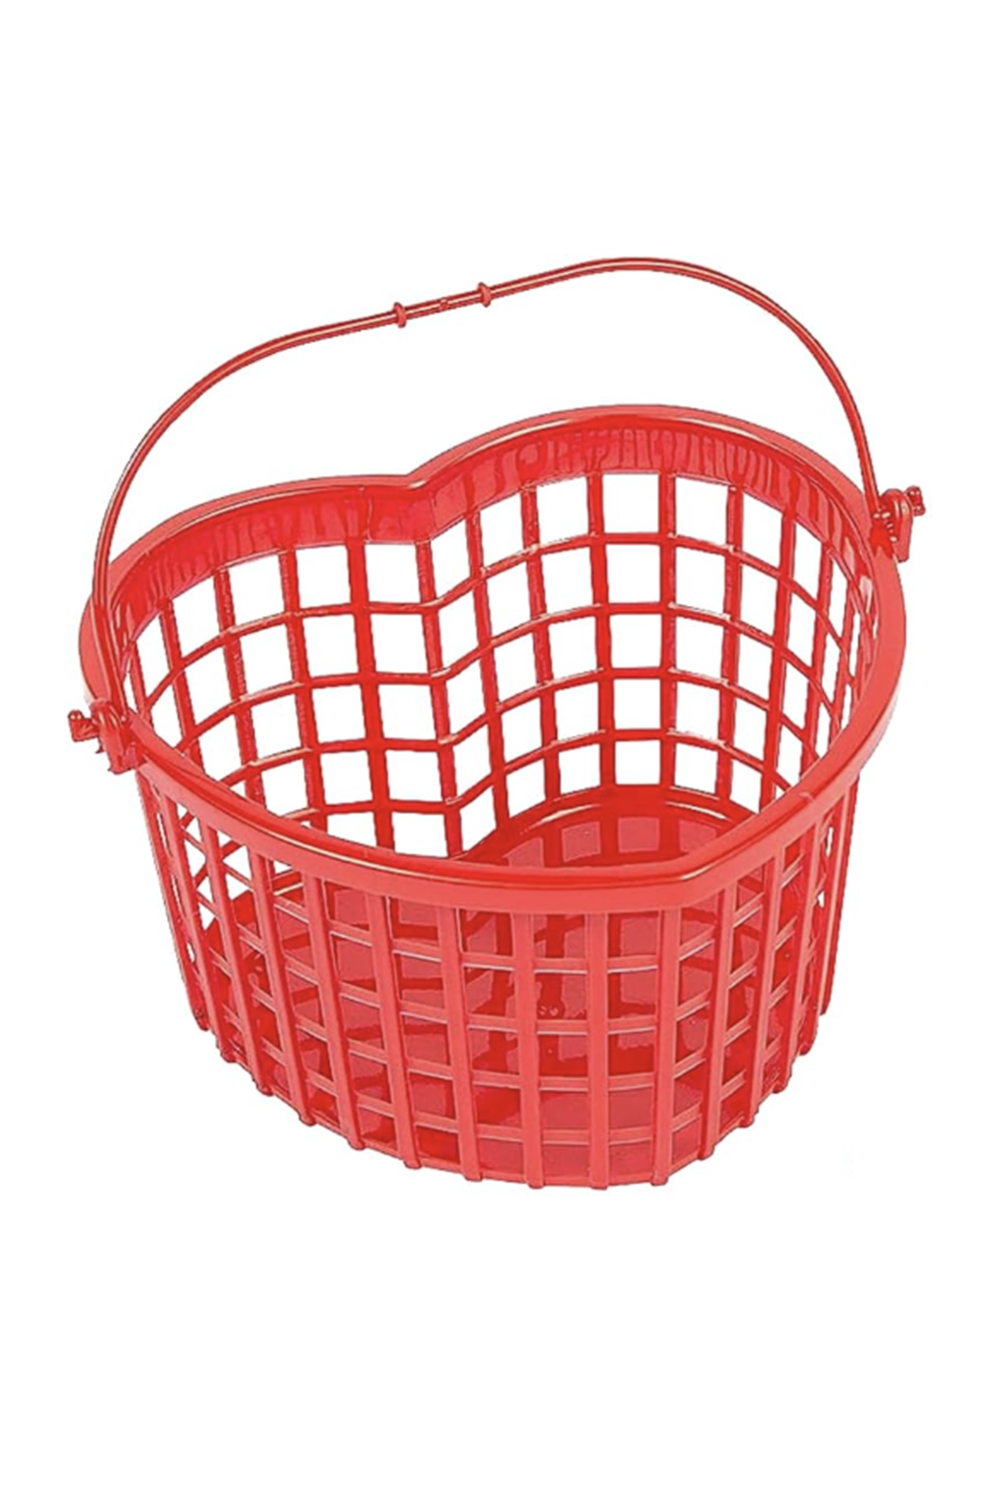 Red Heart Shaped Basket